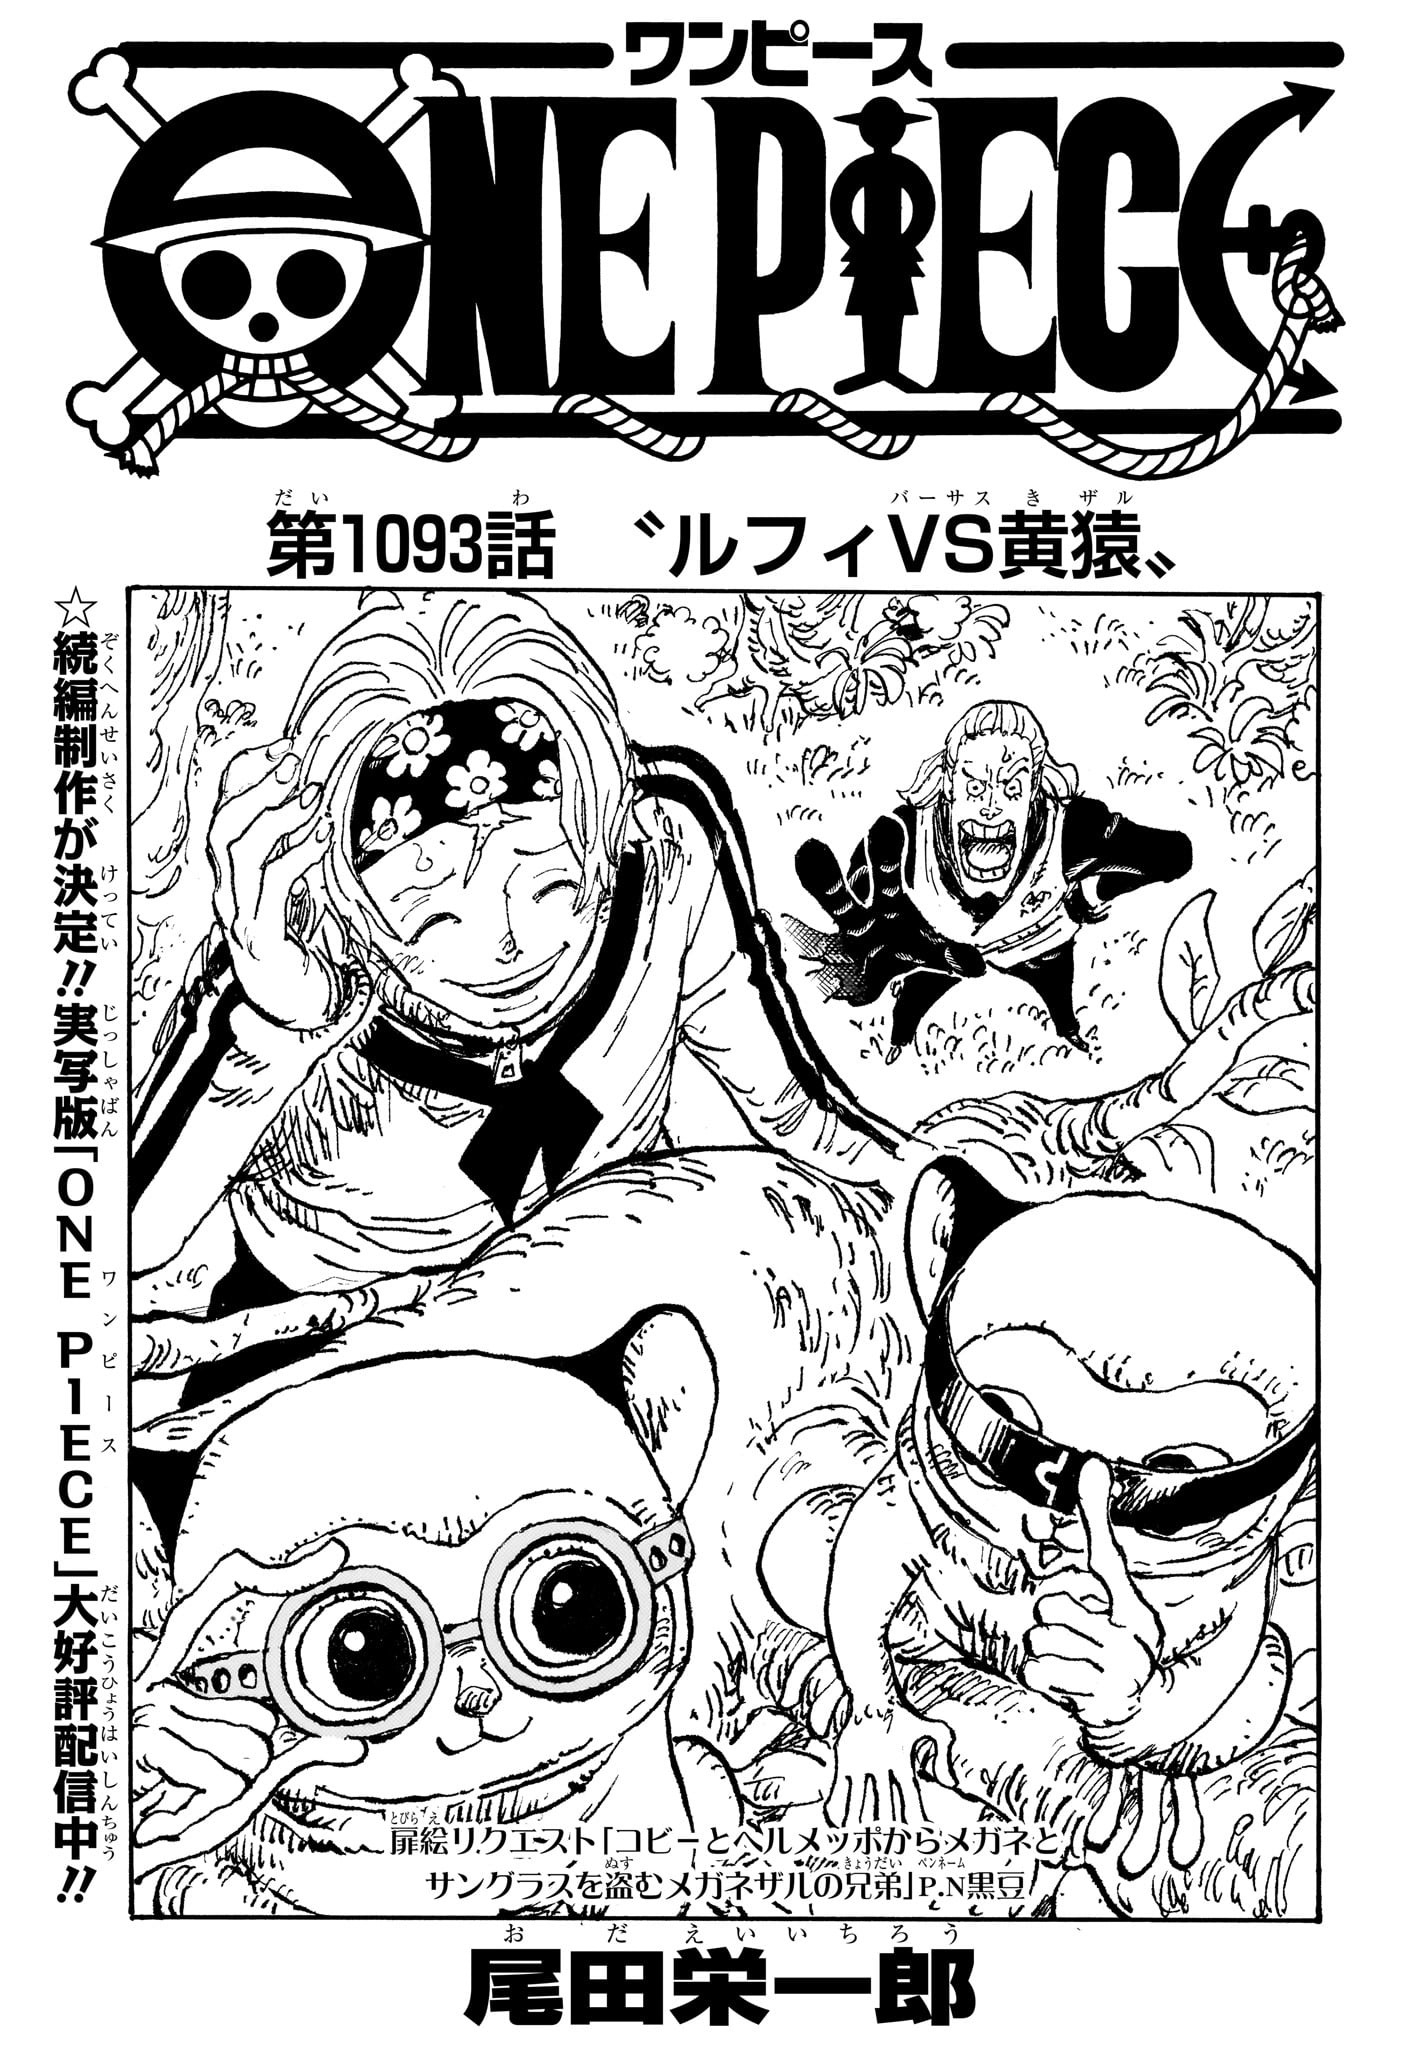 One Piece - Chapter 1093 - Page 1